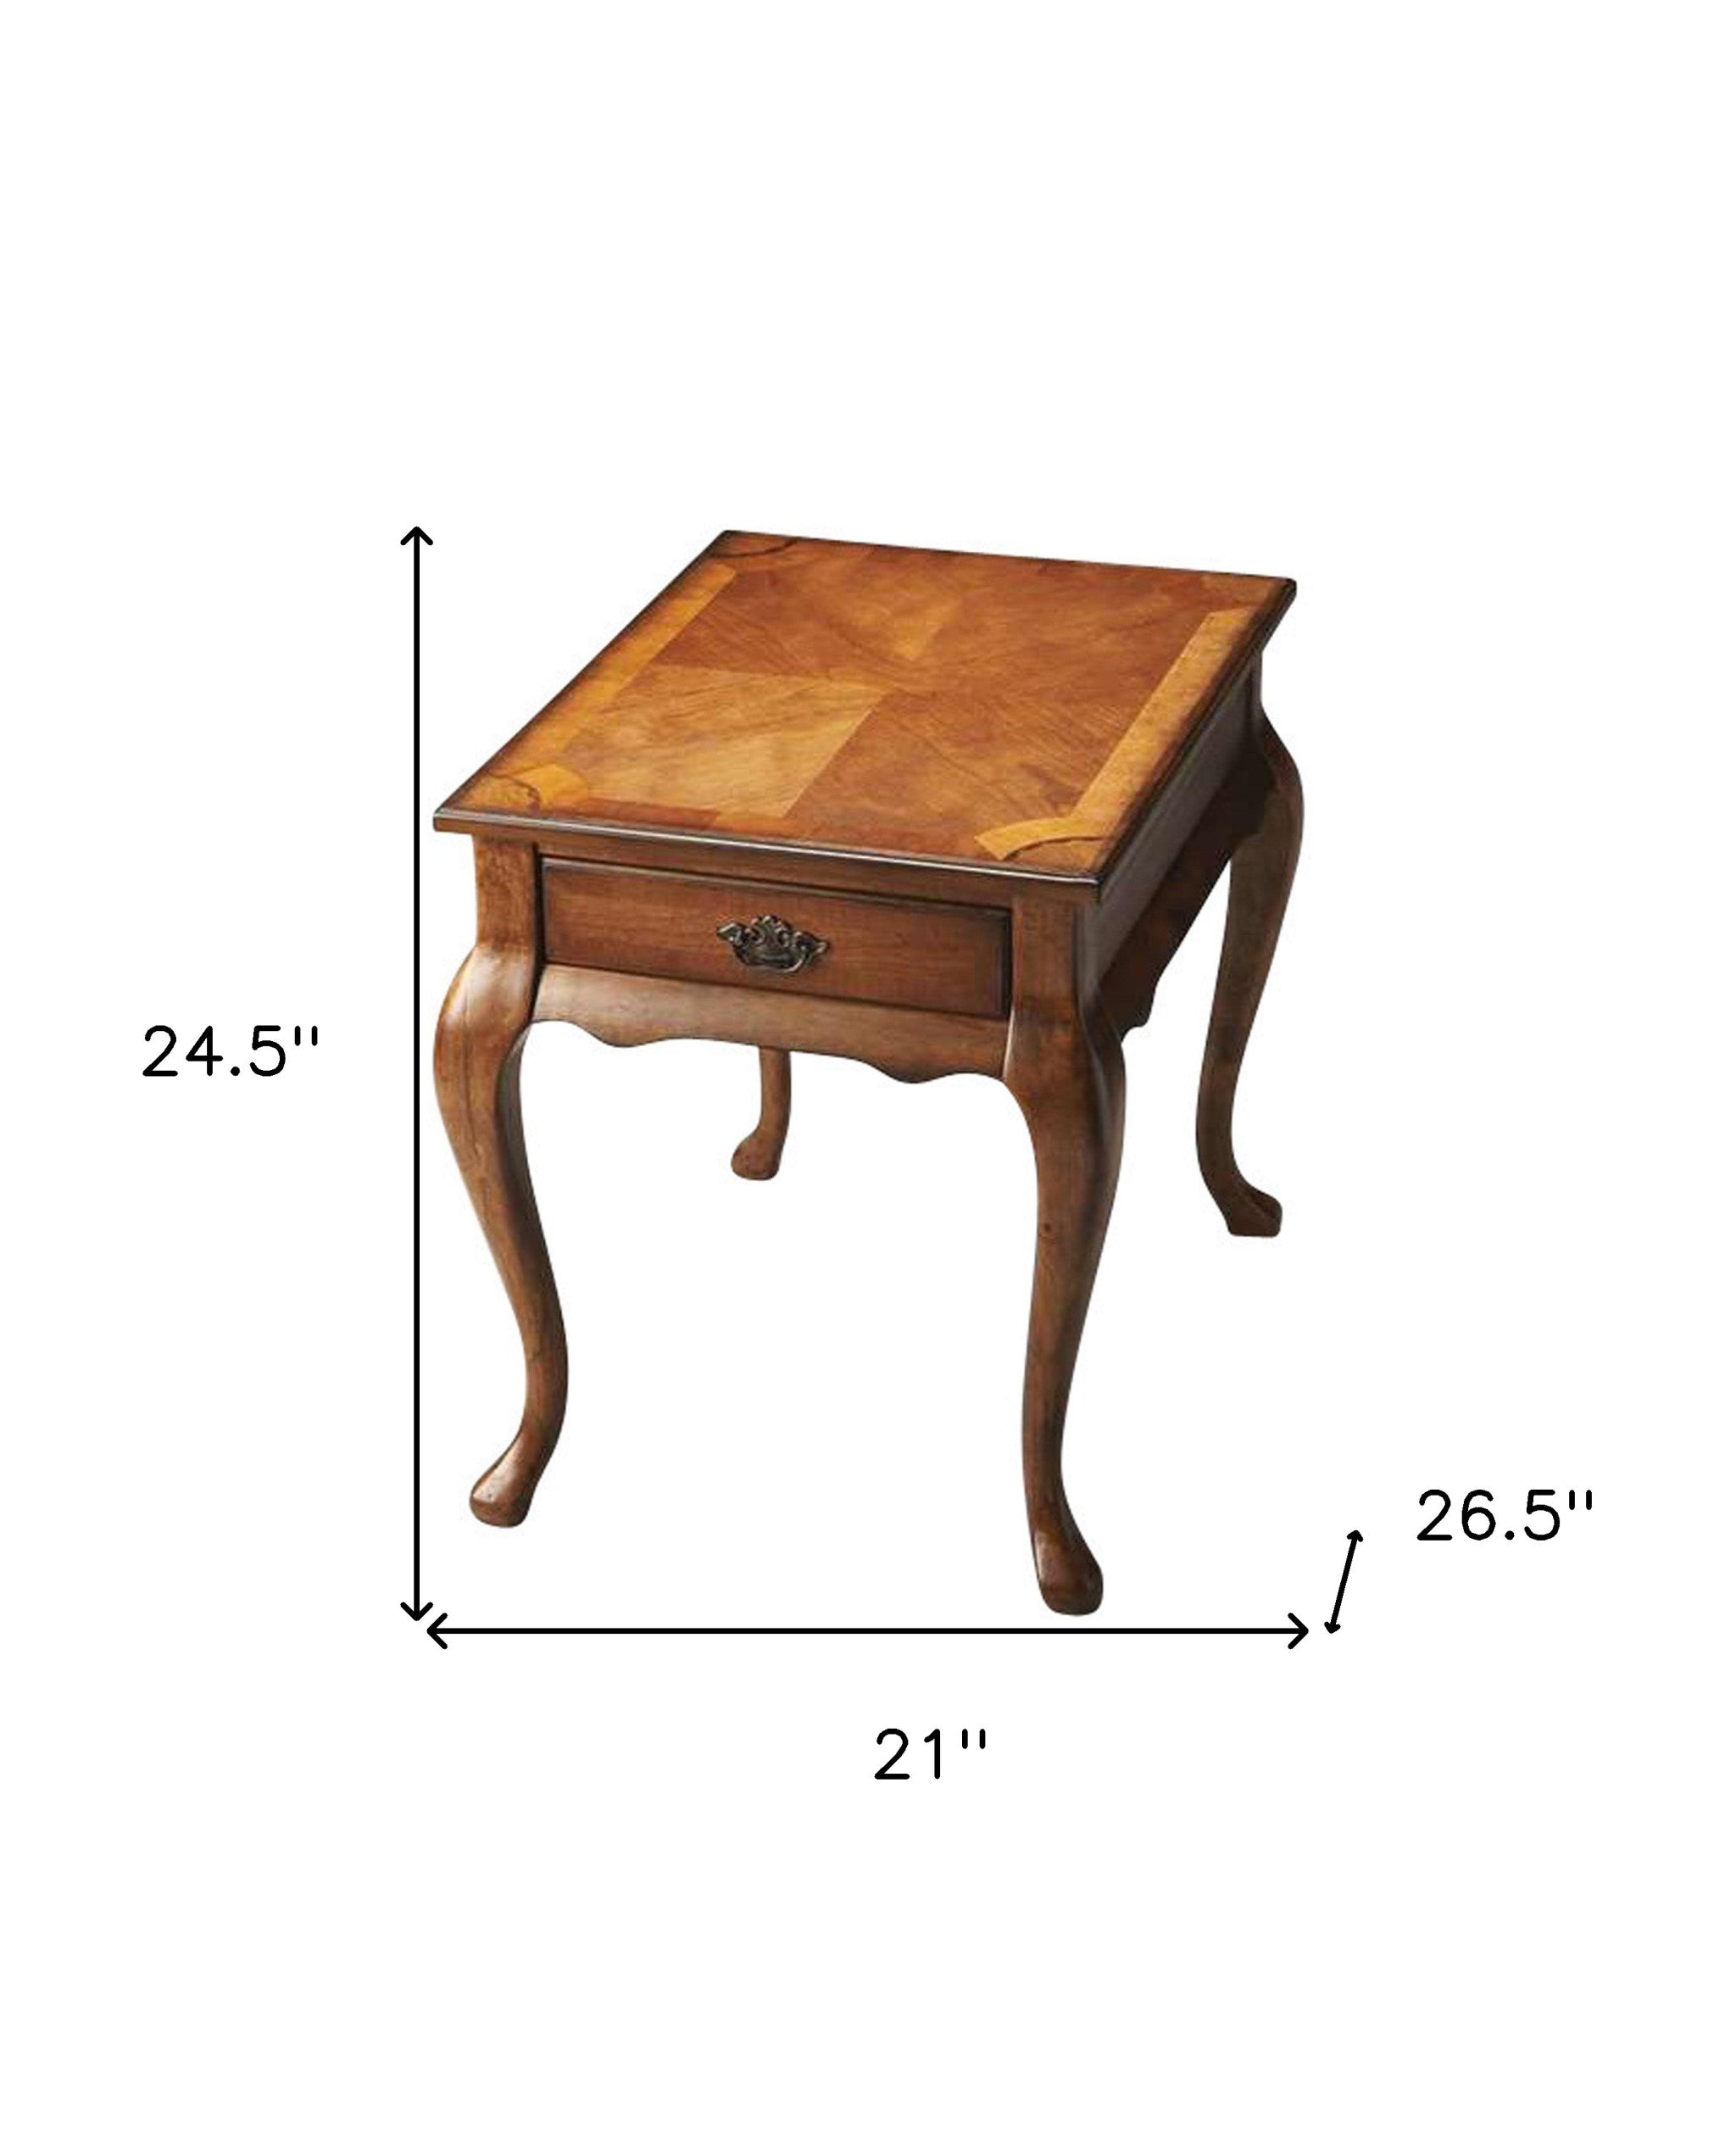 25" Medium Brown Solid And Manufactured Wood Rectangular End Table With Drawer